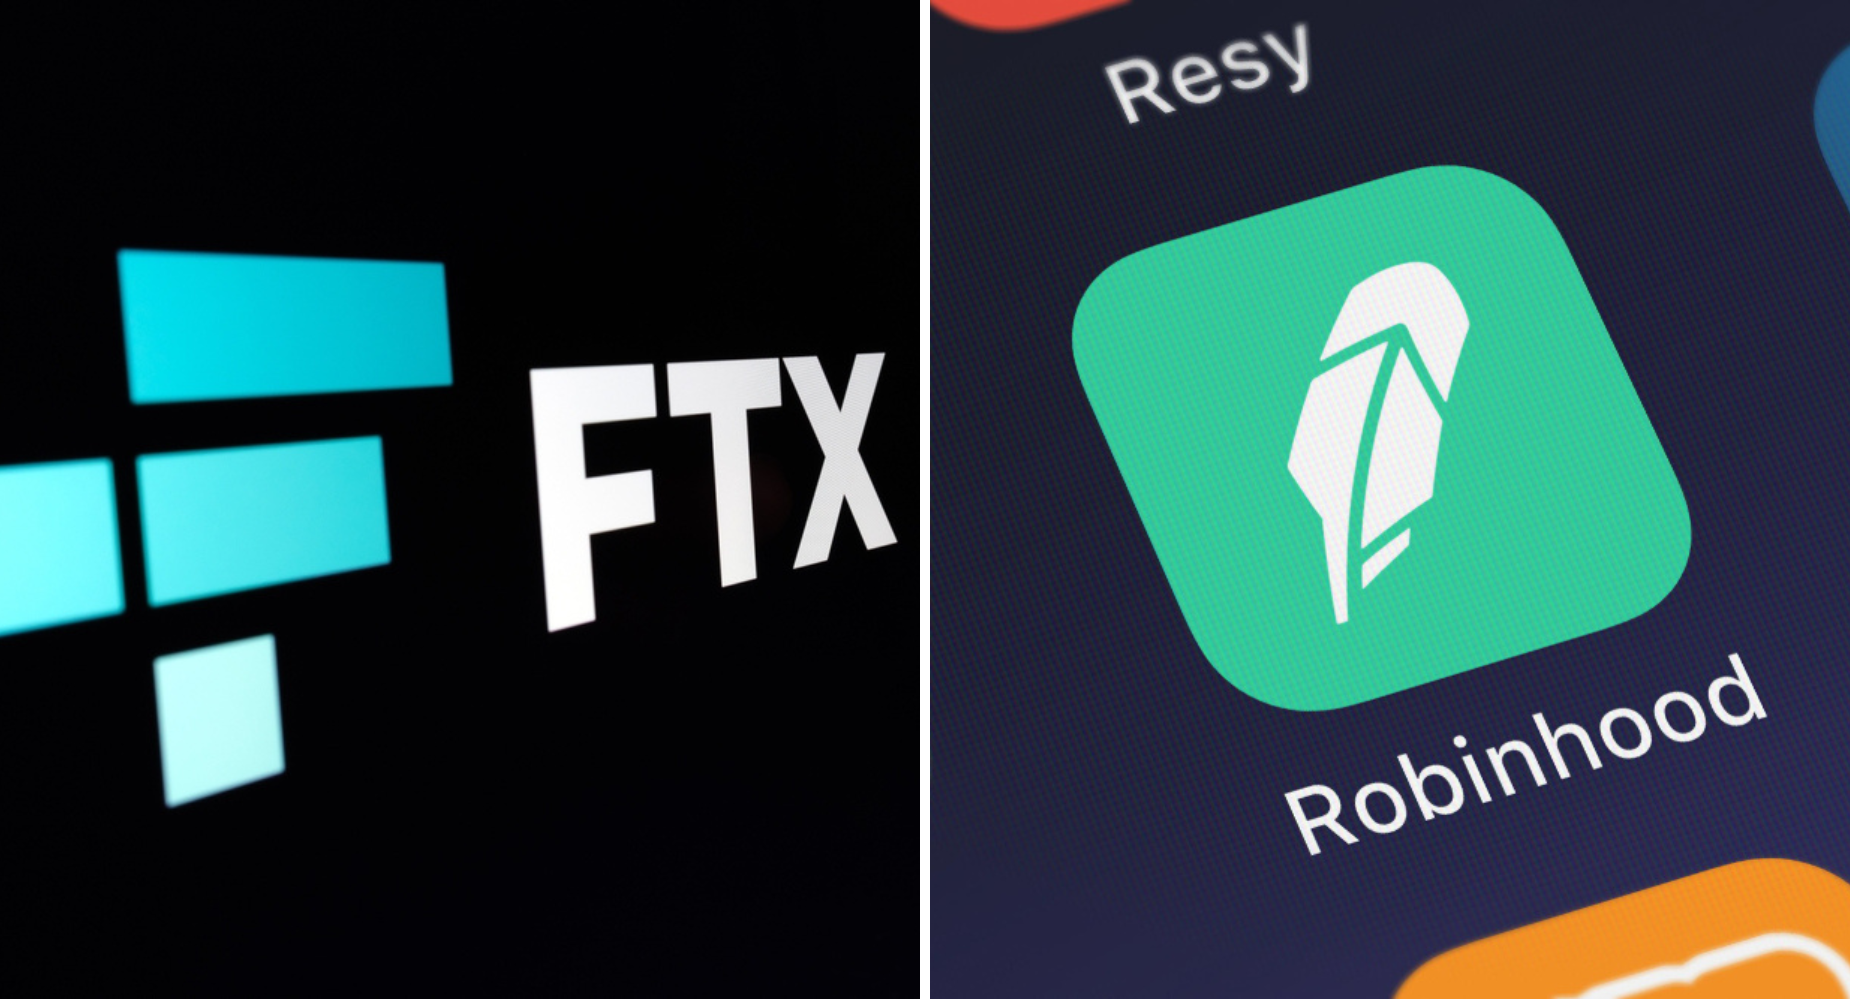 FTX Disputes Ownership Of $450M Robinhood Stock, Seeks Resolution In US Bankruptcy Court